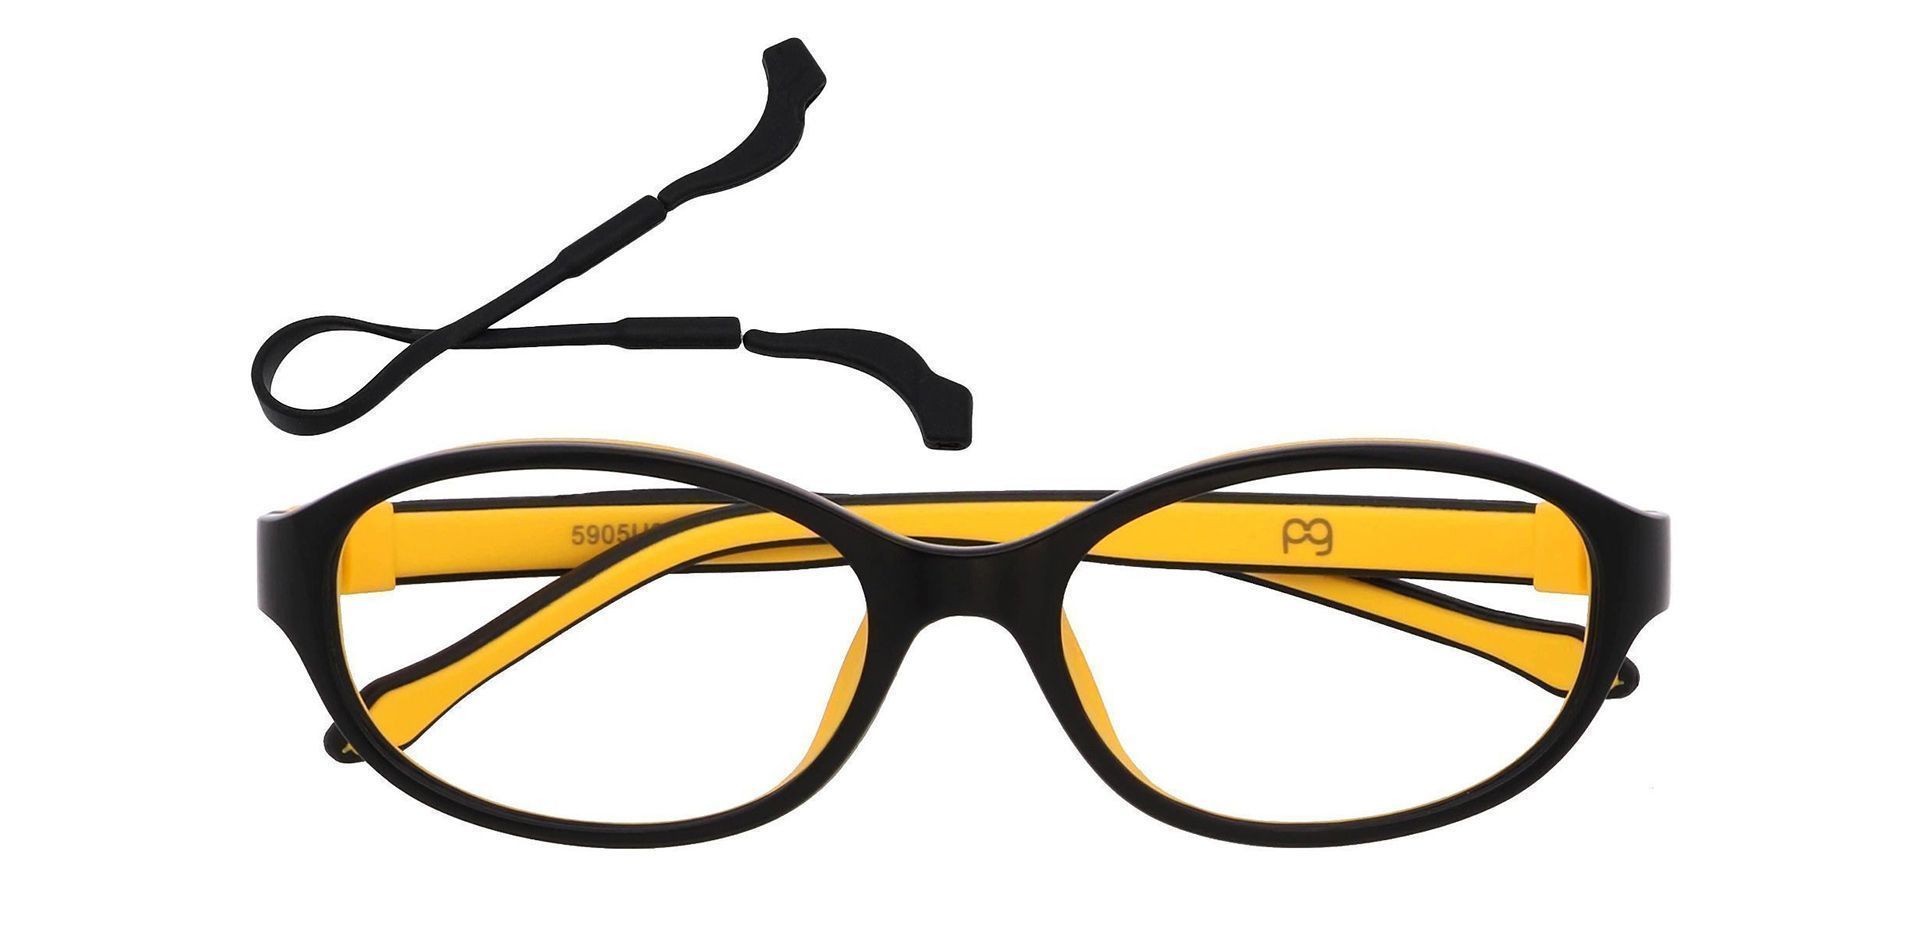 Stone Oval Eyeglasses Frame - The Frame Is Black And Yellow